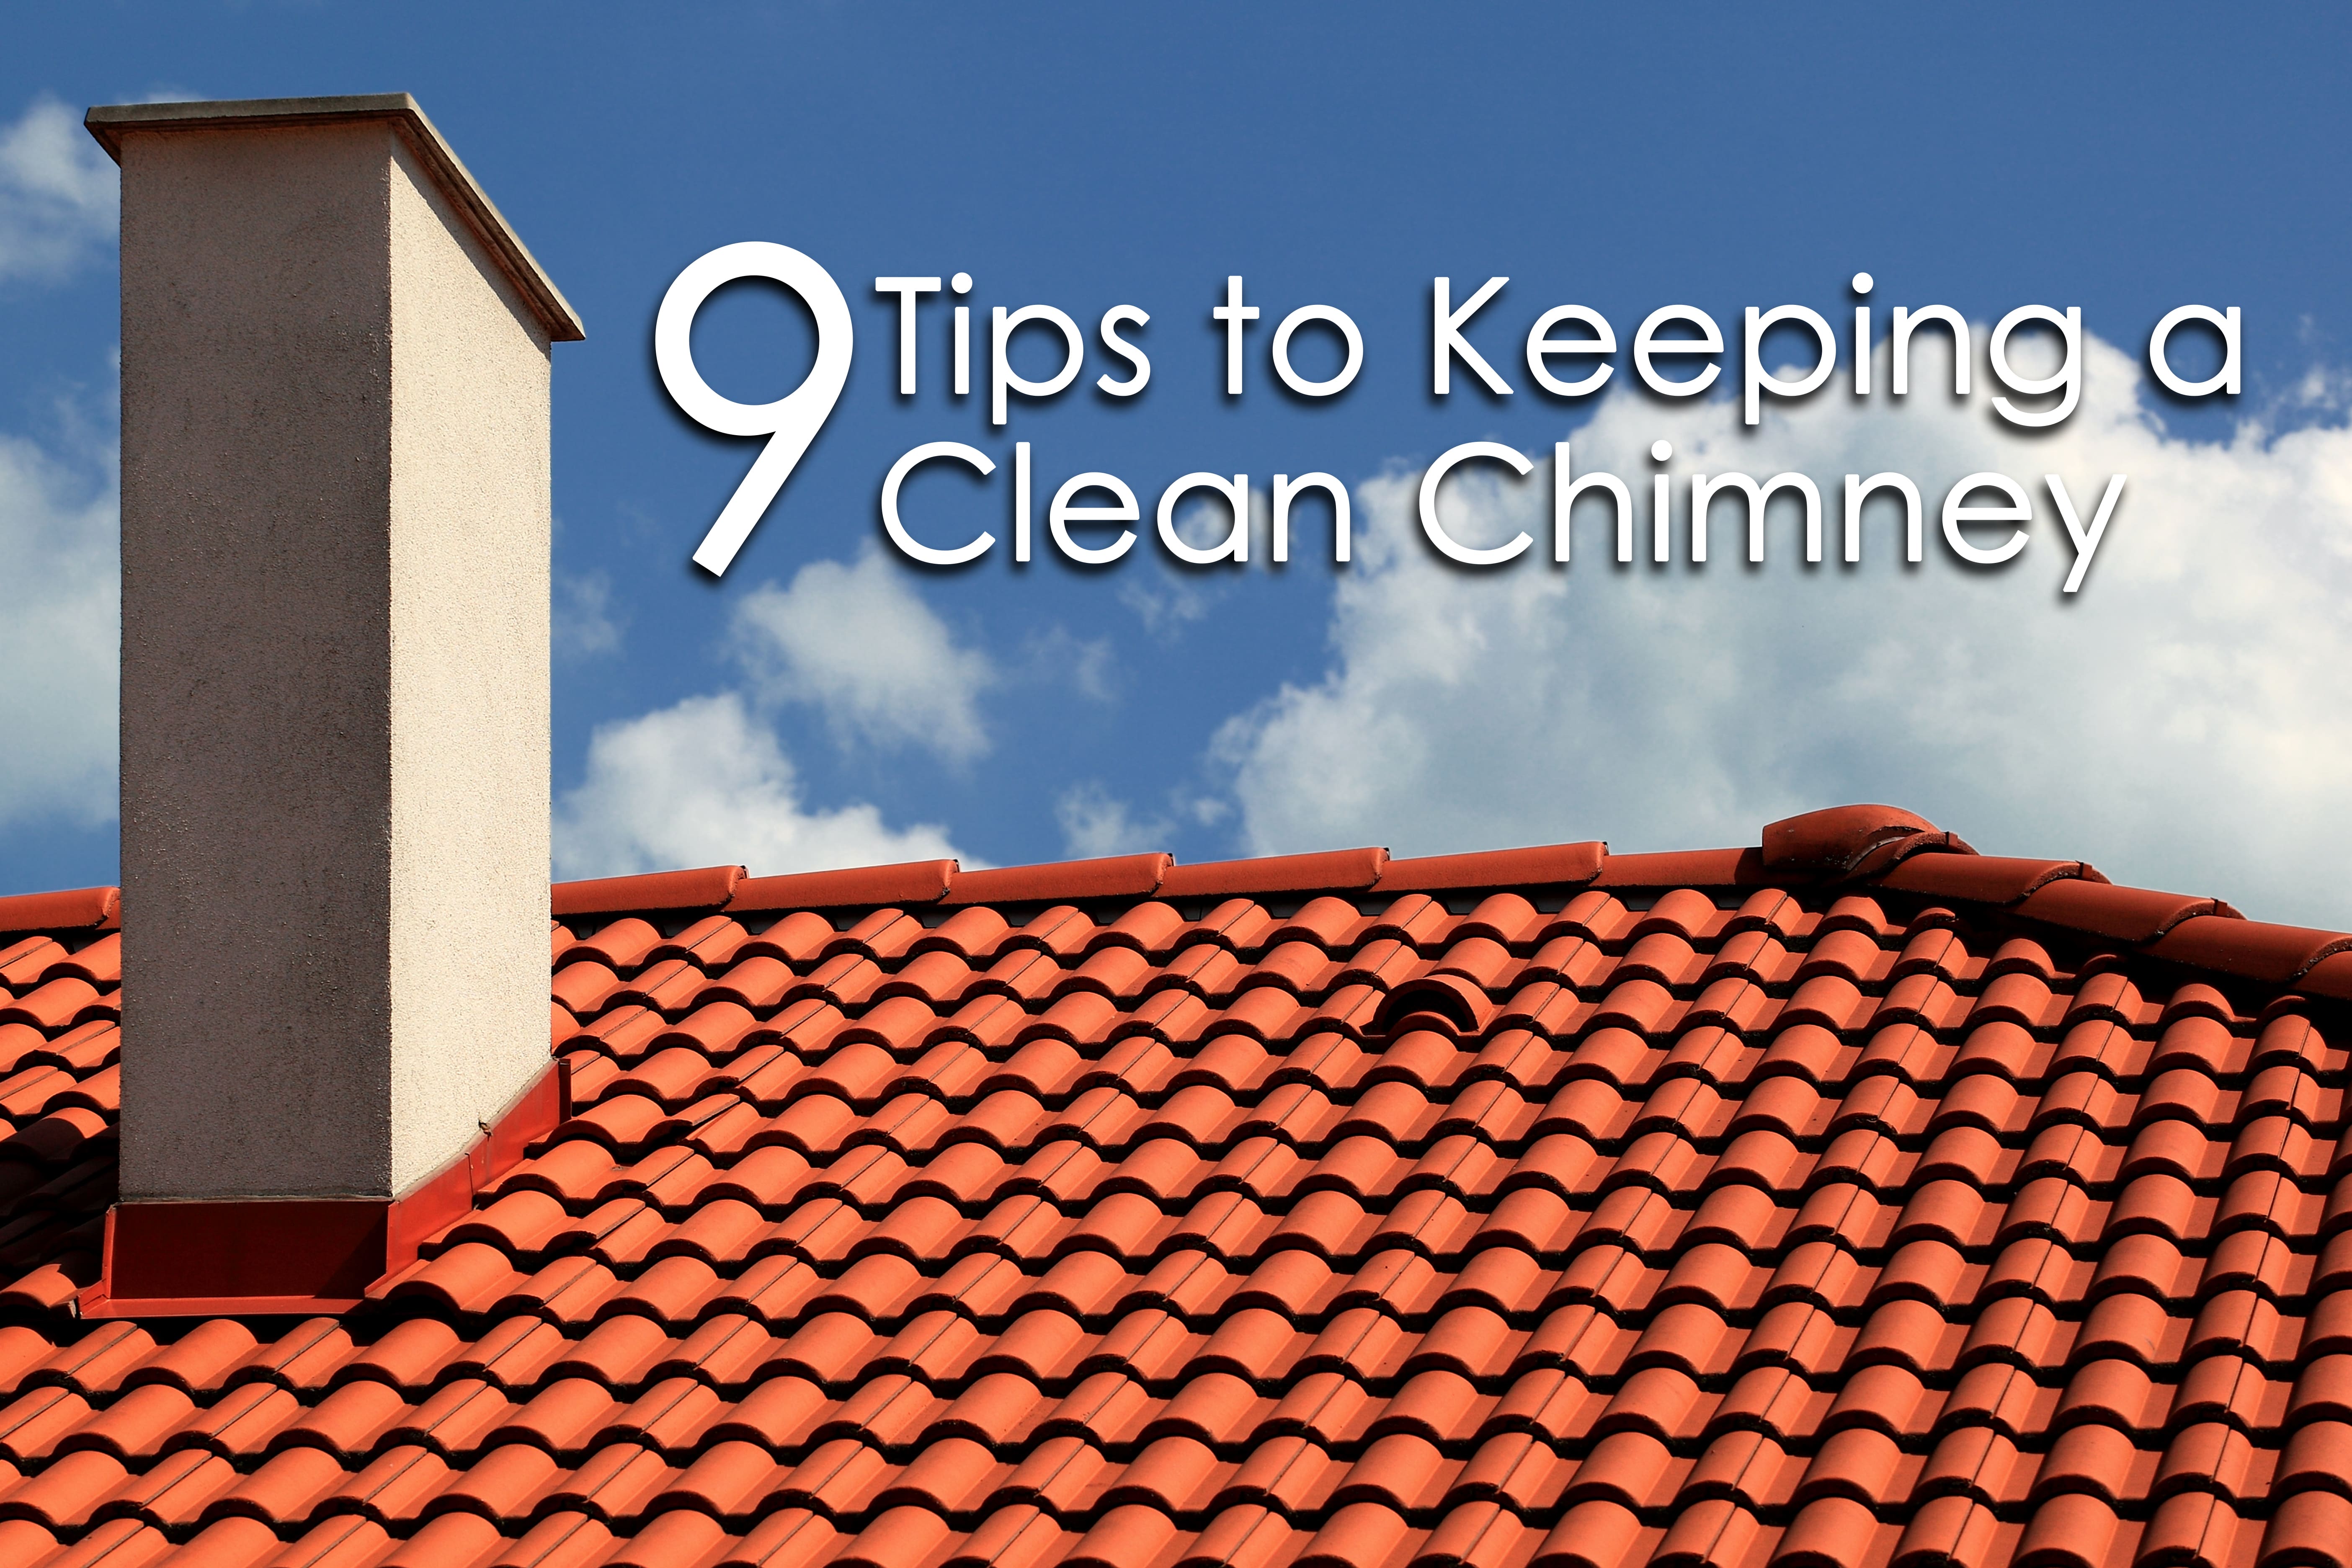 21 Tips to Keeping a Clean Chimney – ICA Agency Alliance, Inc.